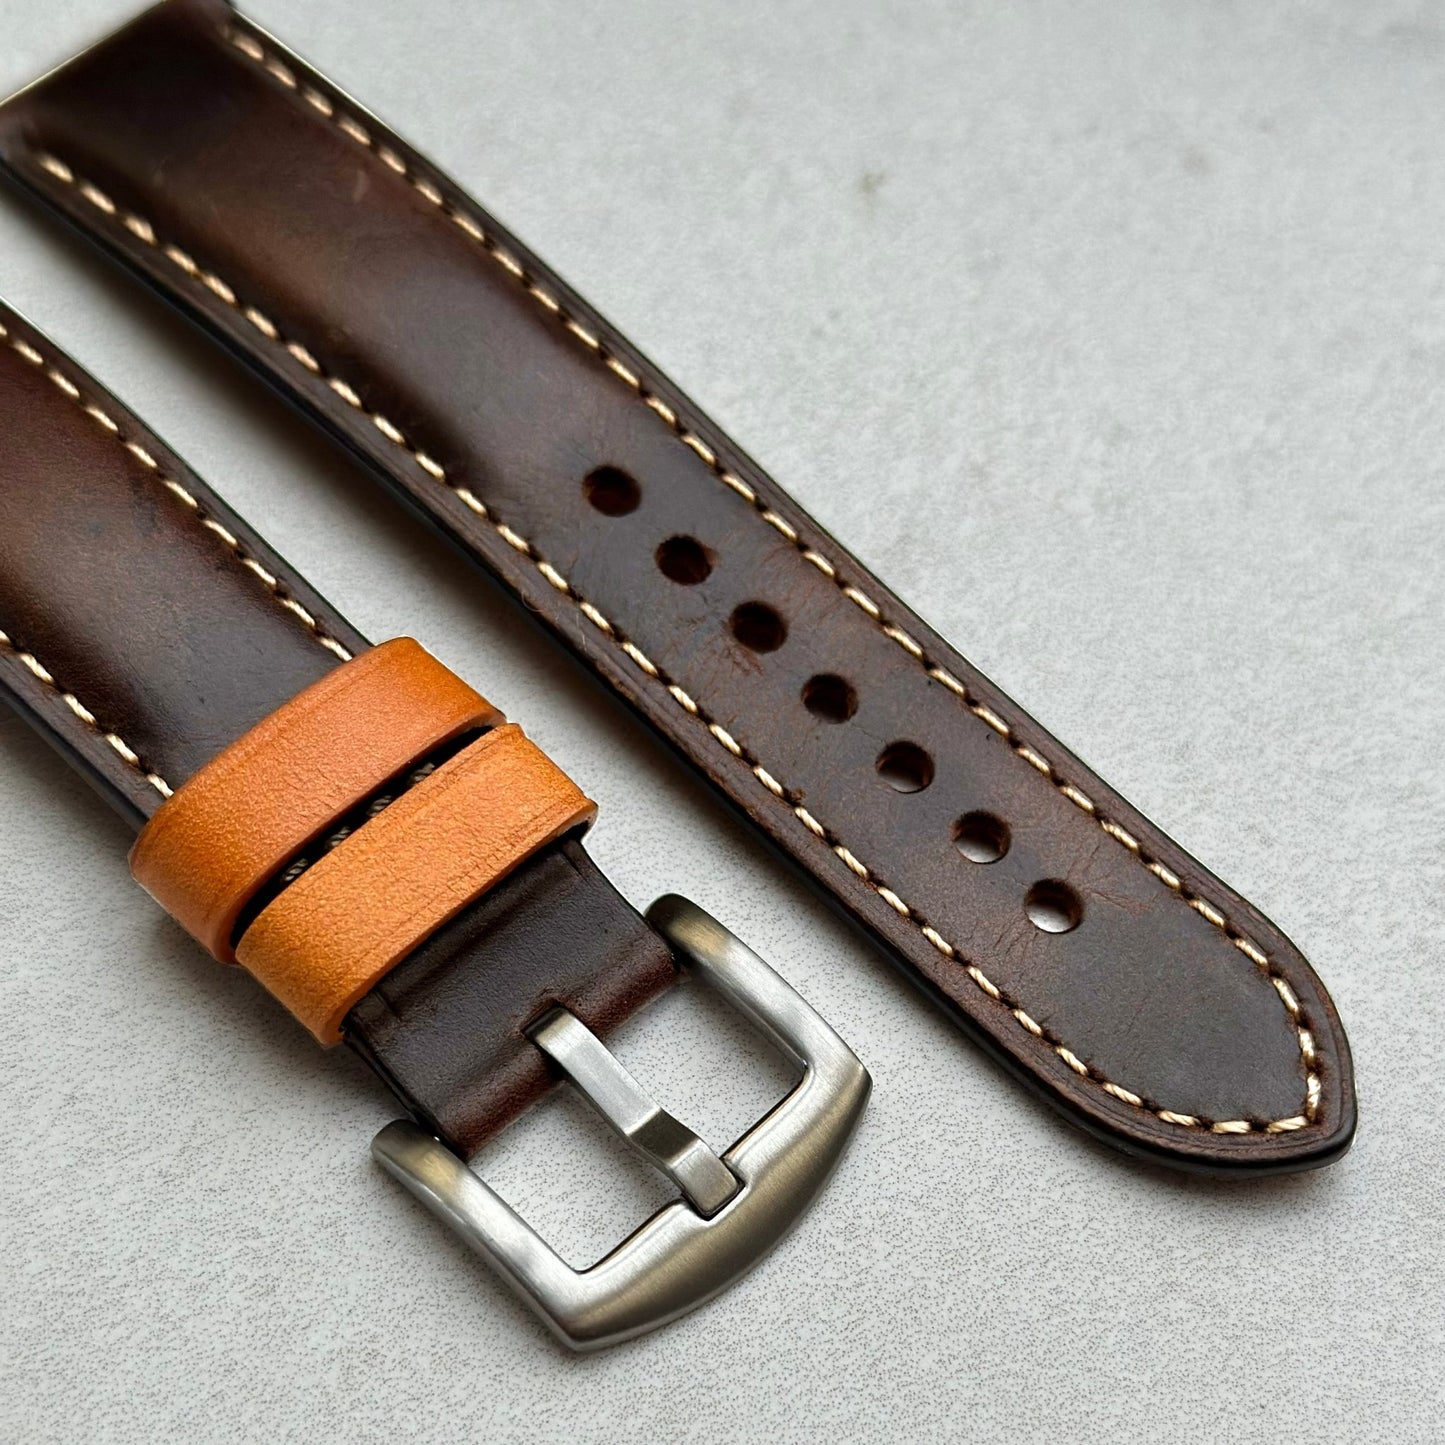 Brushed 316L stainless steel buckle on the Oxford chocolate brown full grain leather watch strap. Watch And Strap.